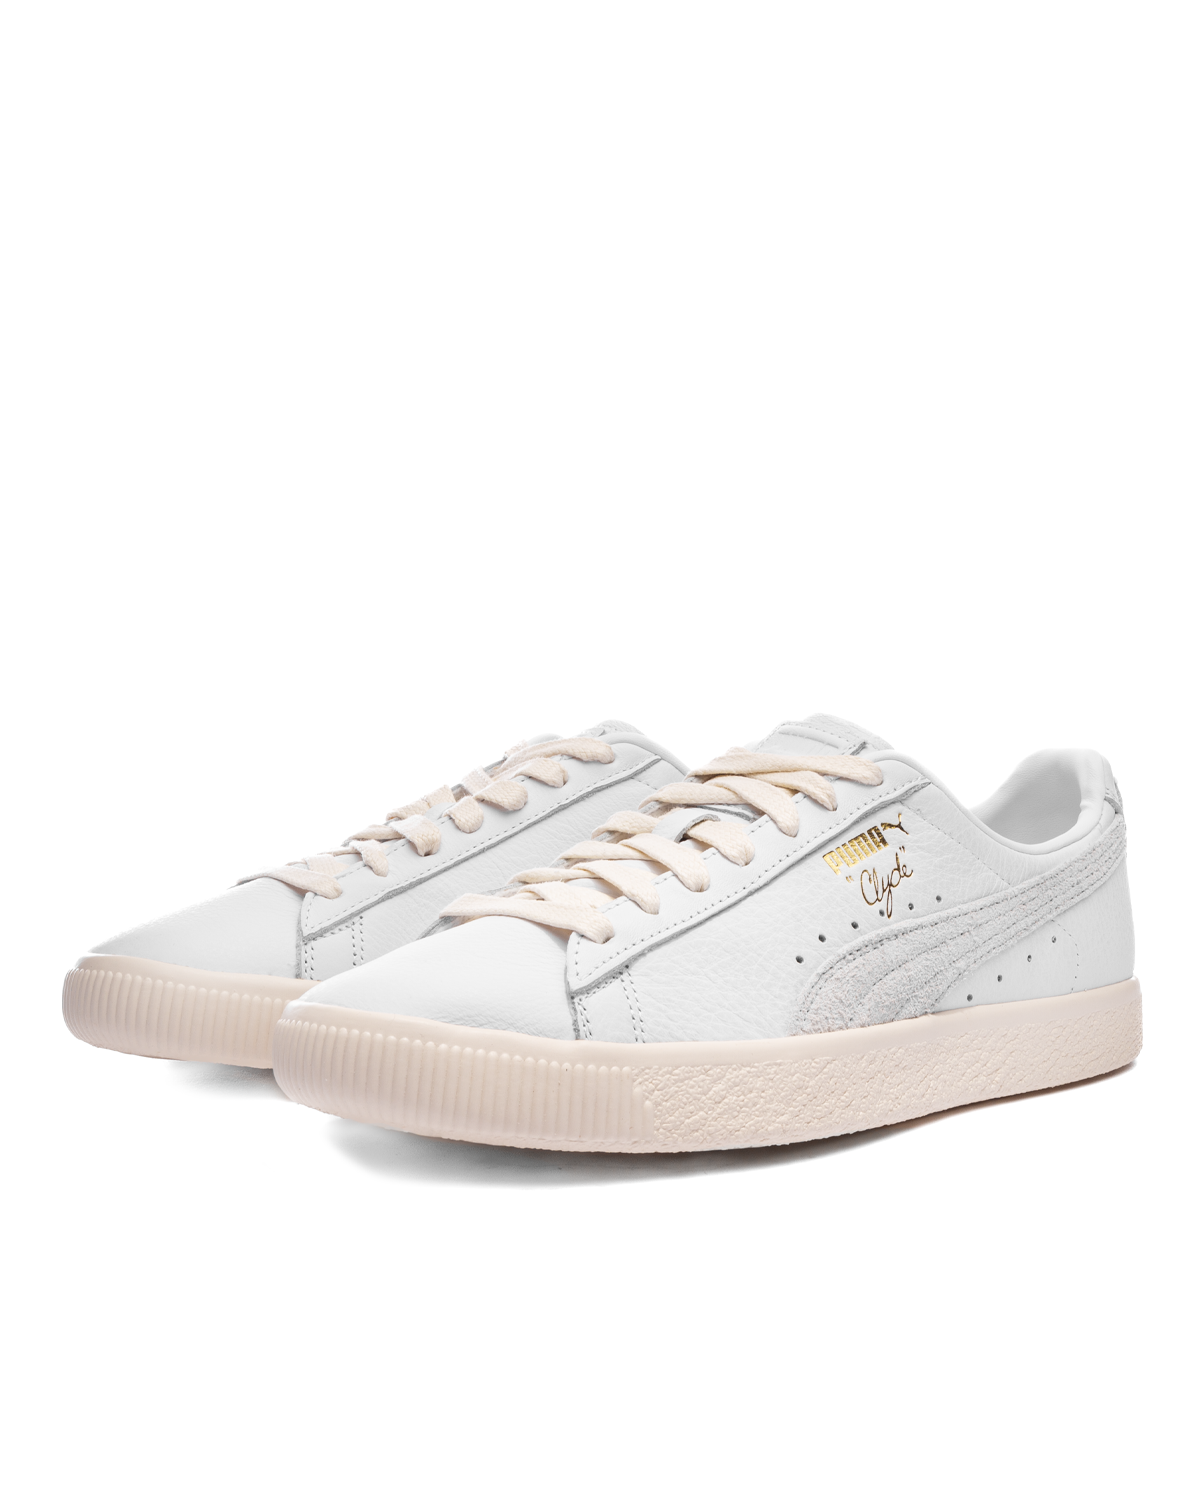 Clyde Base Puma White/Frosted Ivory/Puma Team Gold